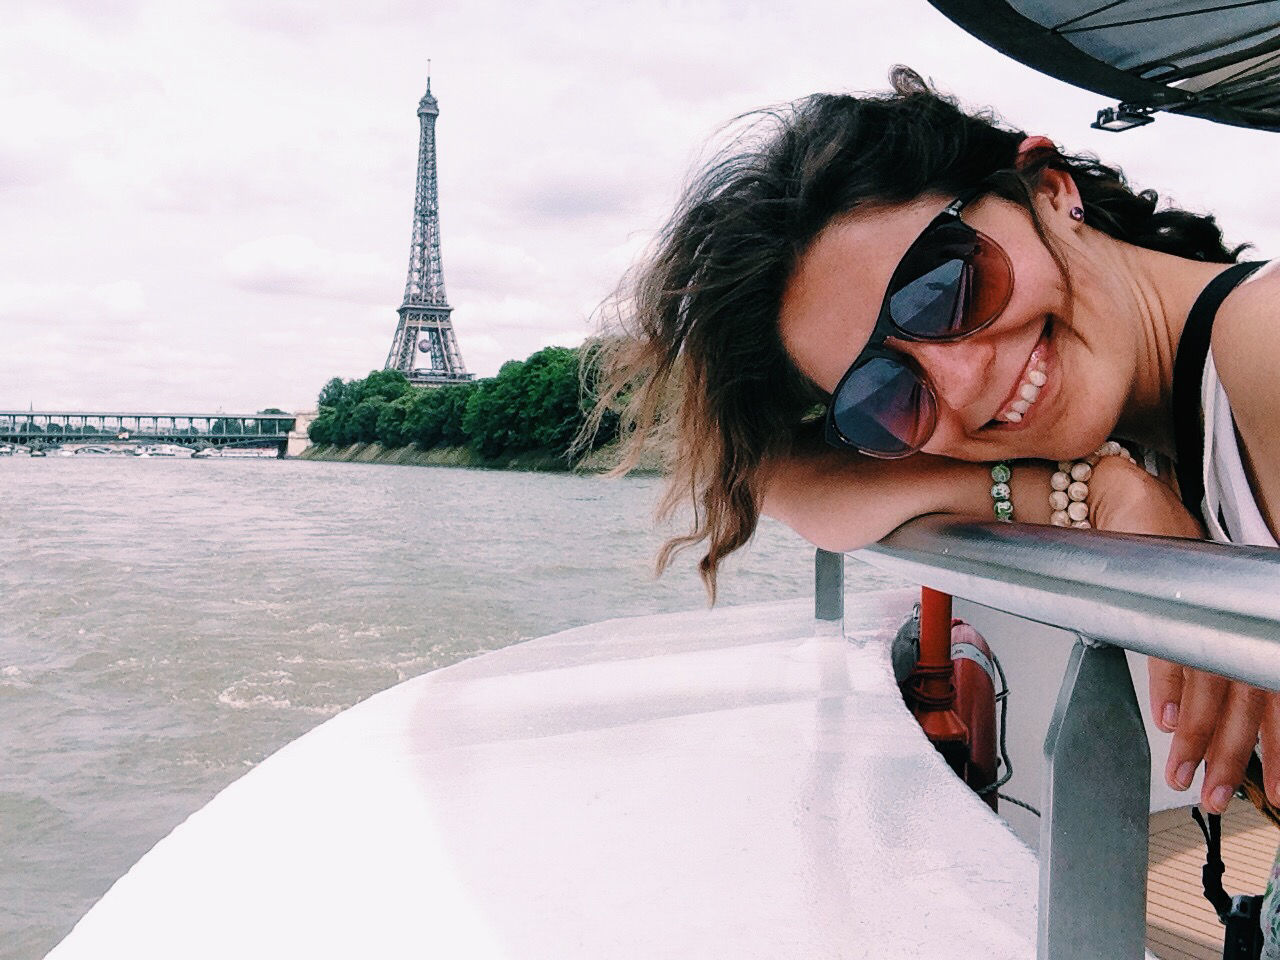 Portrait of woman traveling in boat against eiffel tower